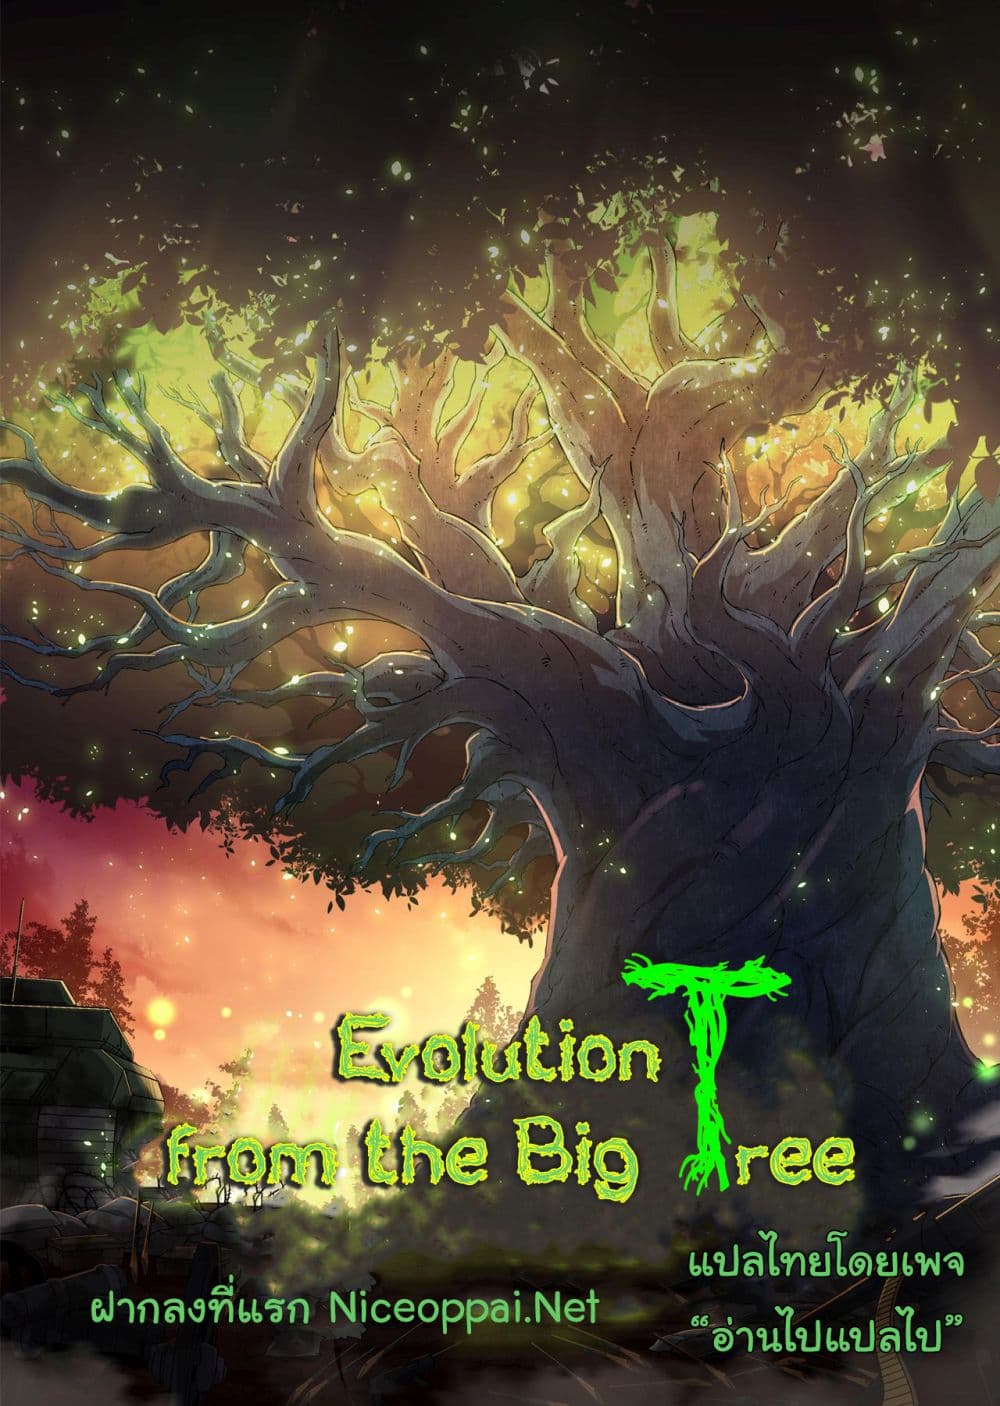 Evolution from the Big Tree 19 01